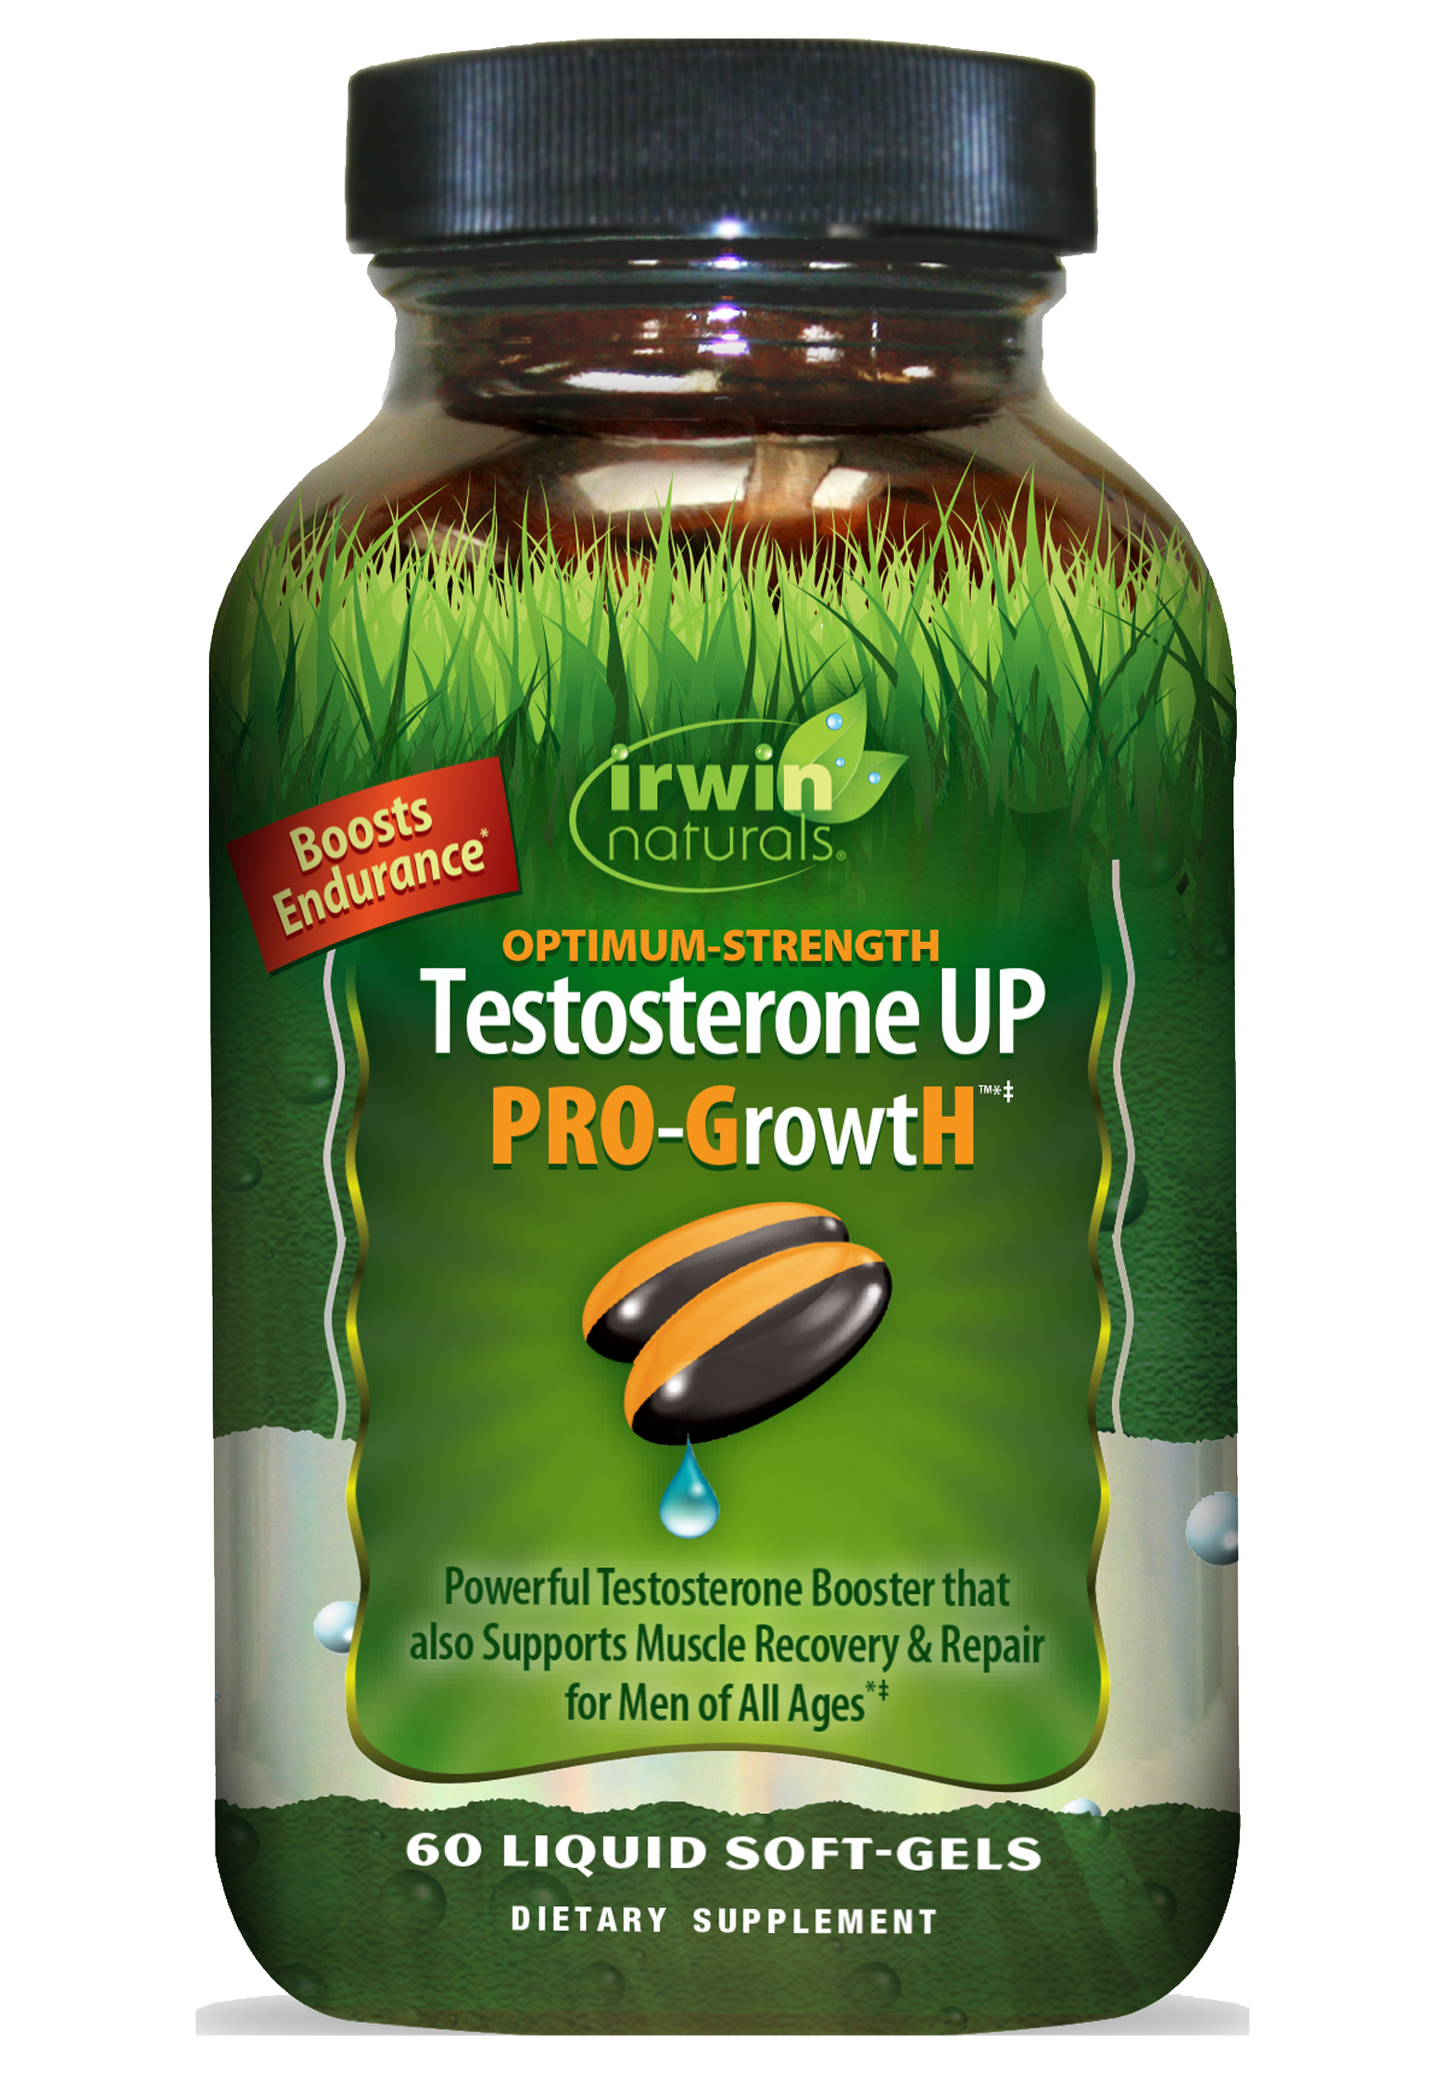 Testosterone UP PRO-GrowtH